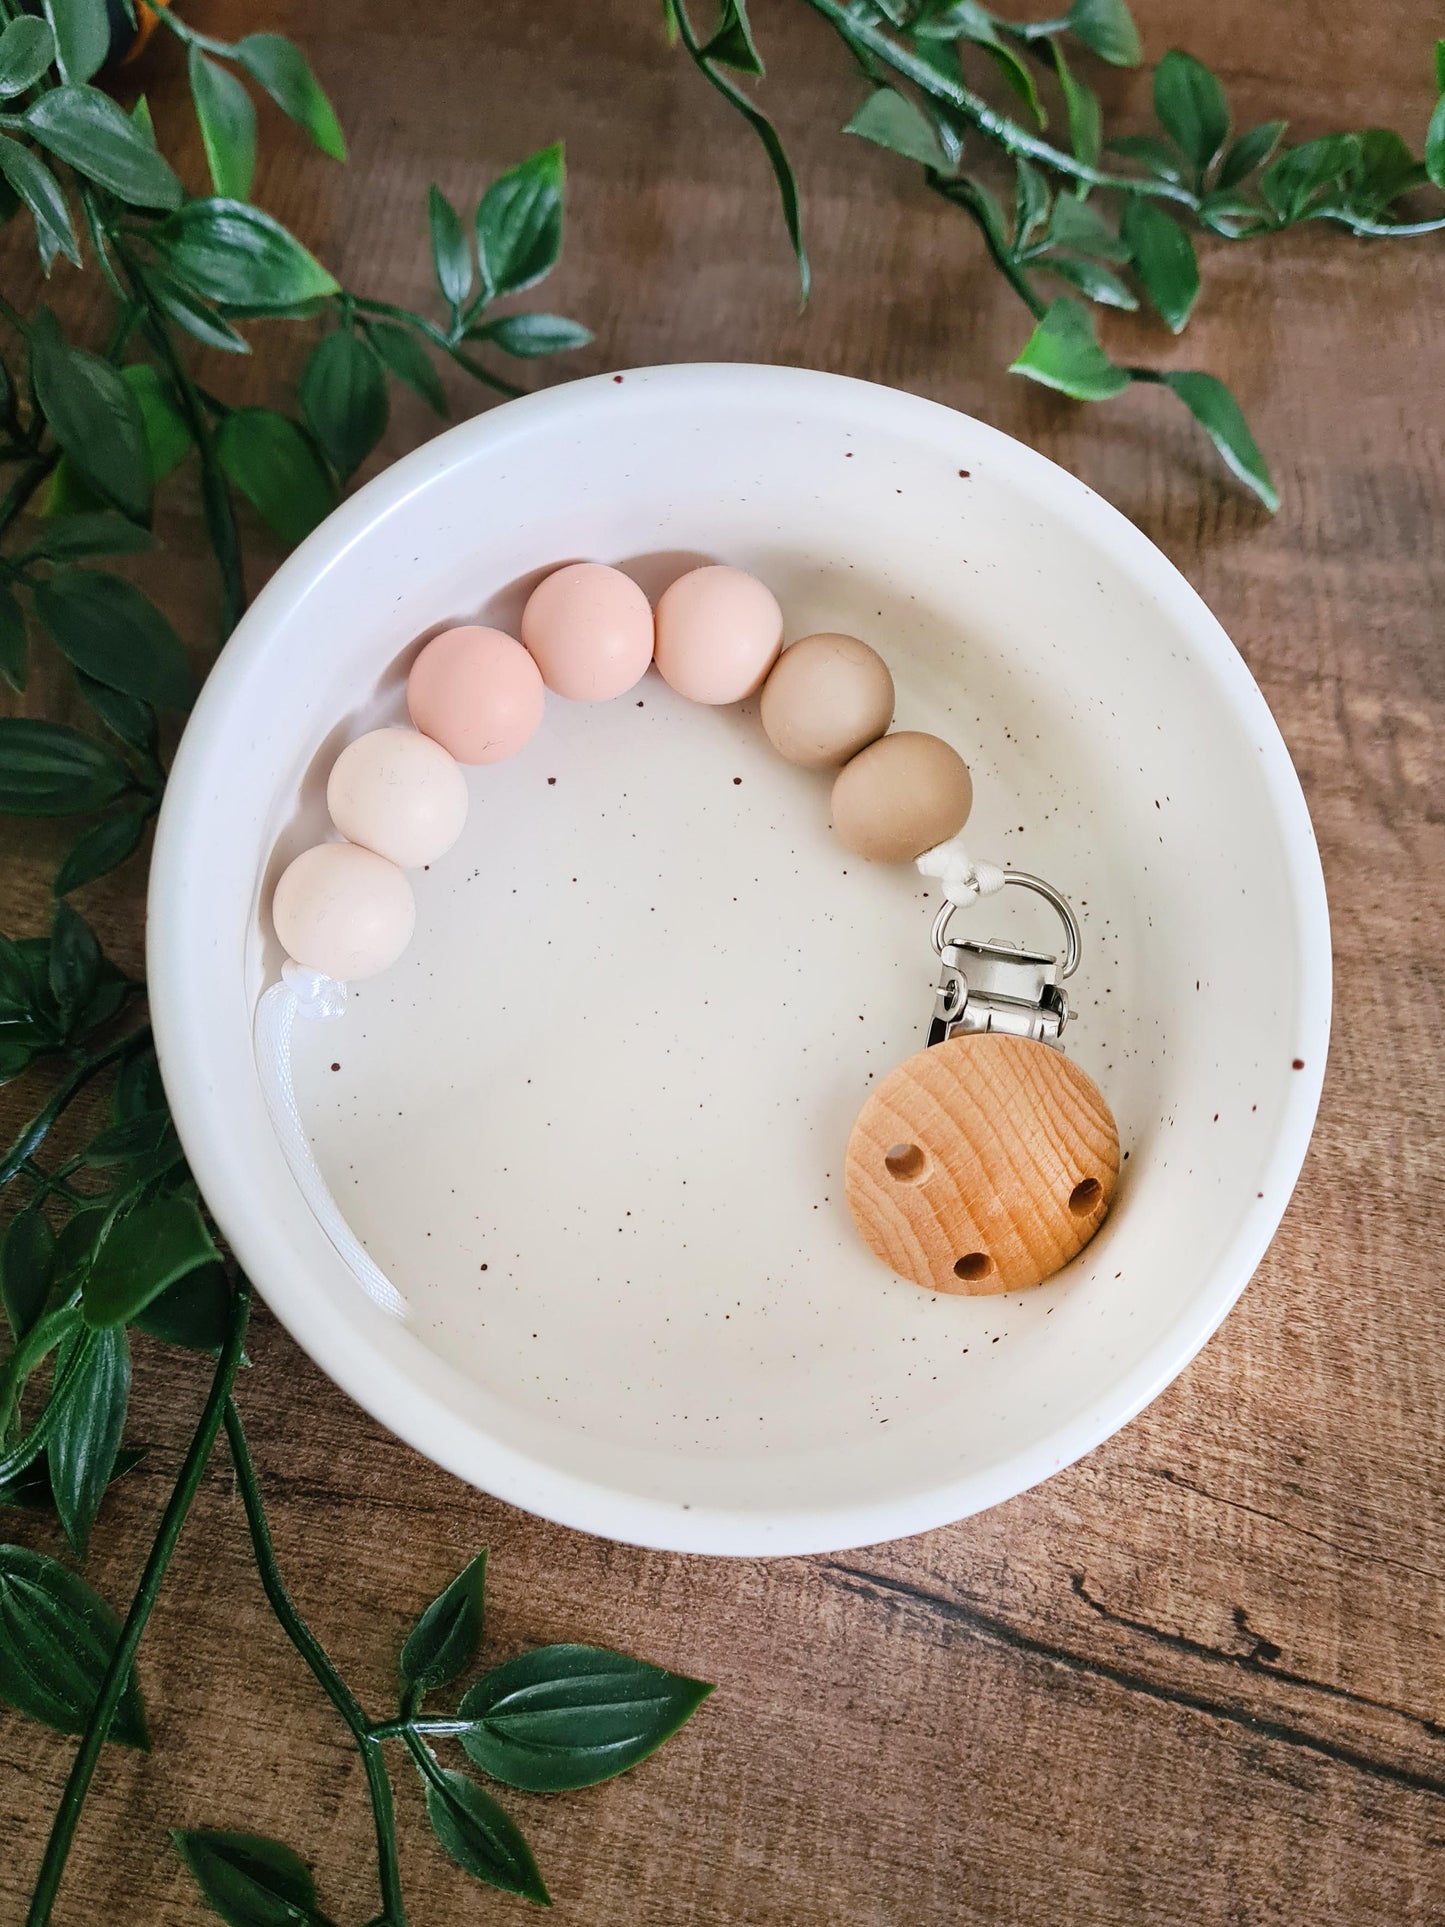 The Nibbly Neapolitan soother clip is a good handmade gift idea for newborns or toddlers. Perfect for the sweet hearts who love Neapolitan Ice Cream!